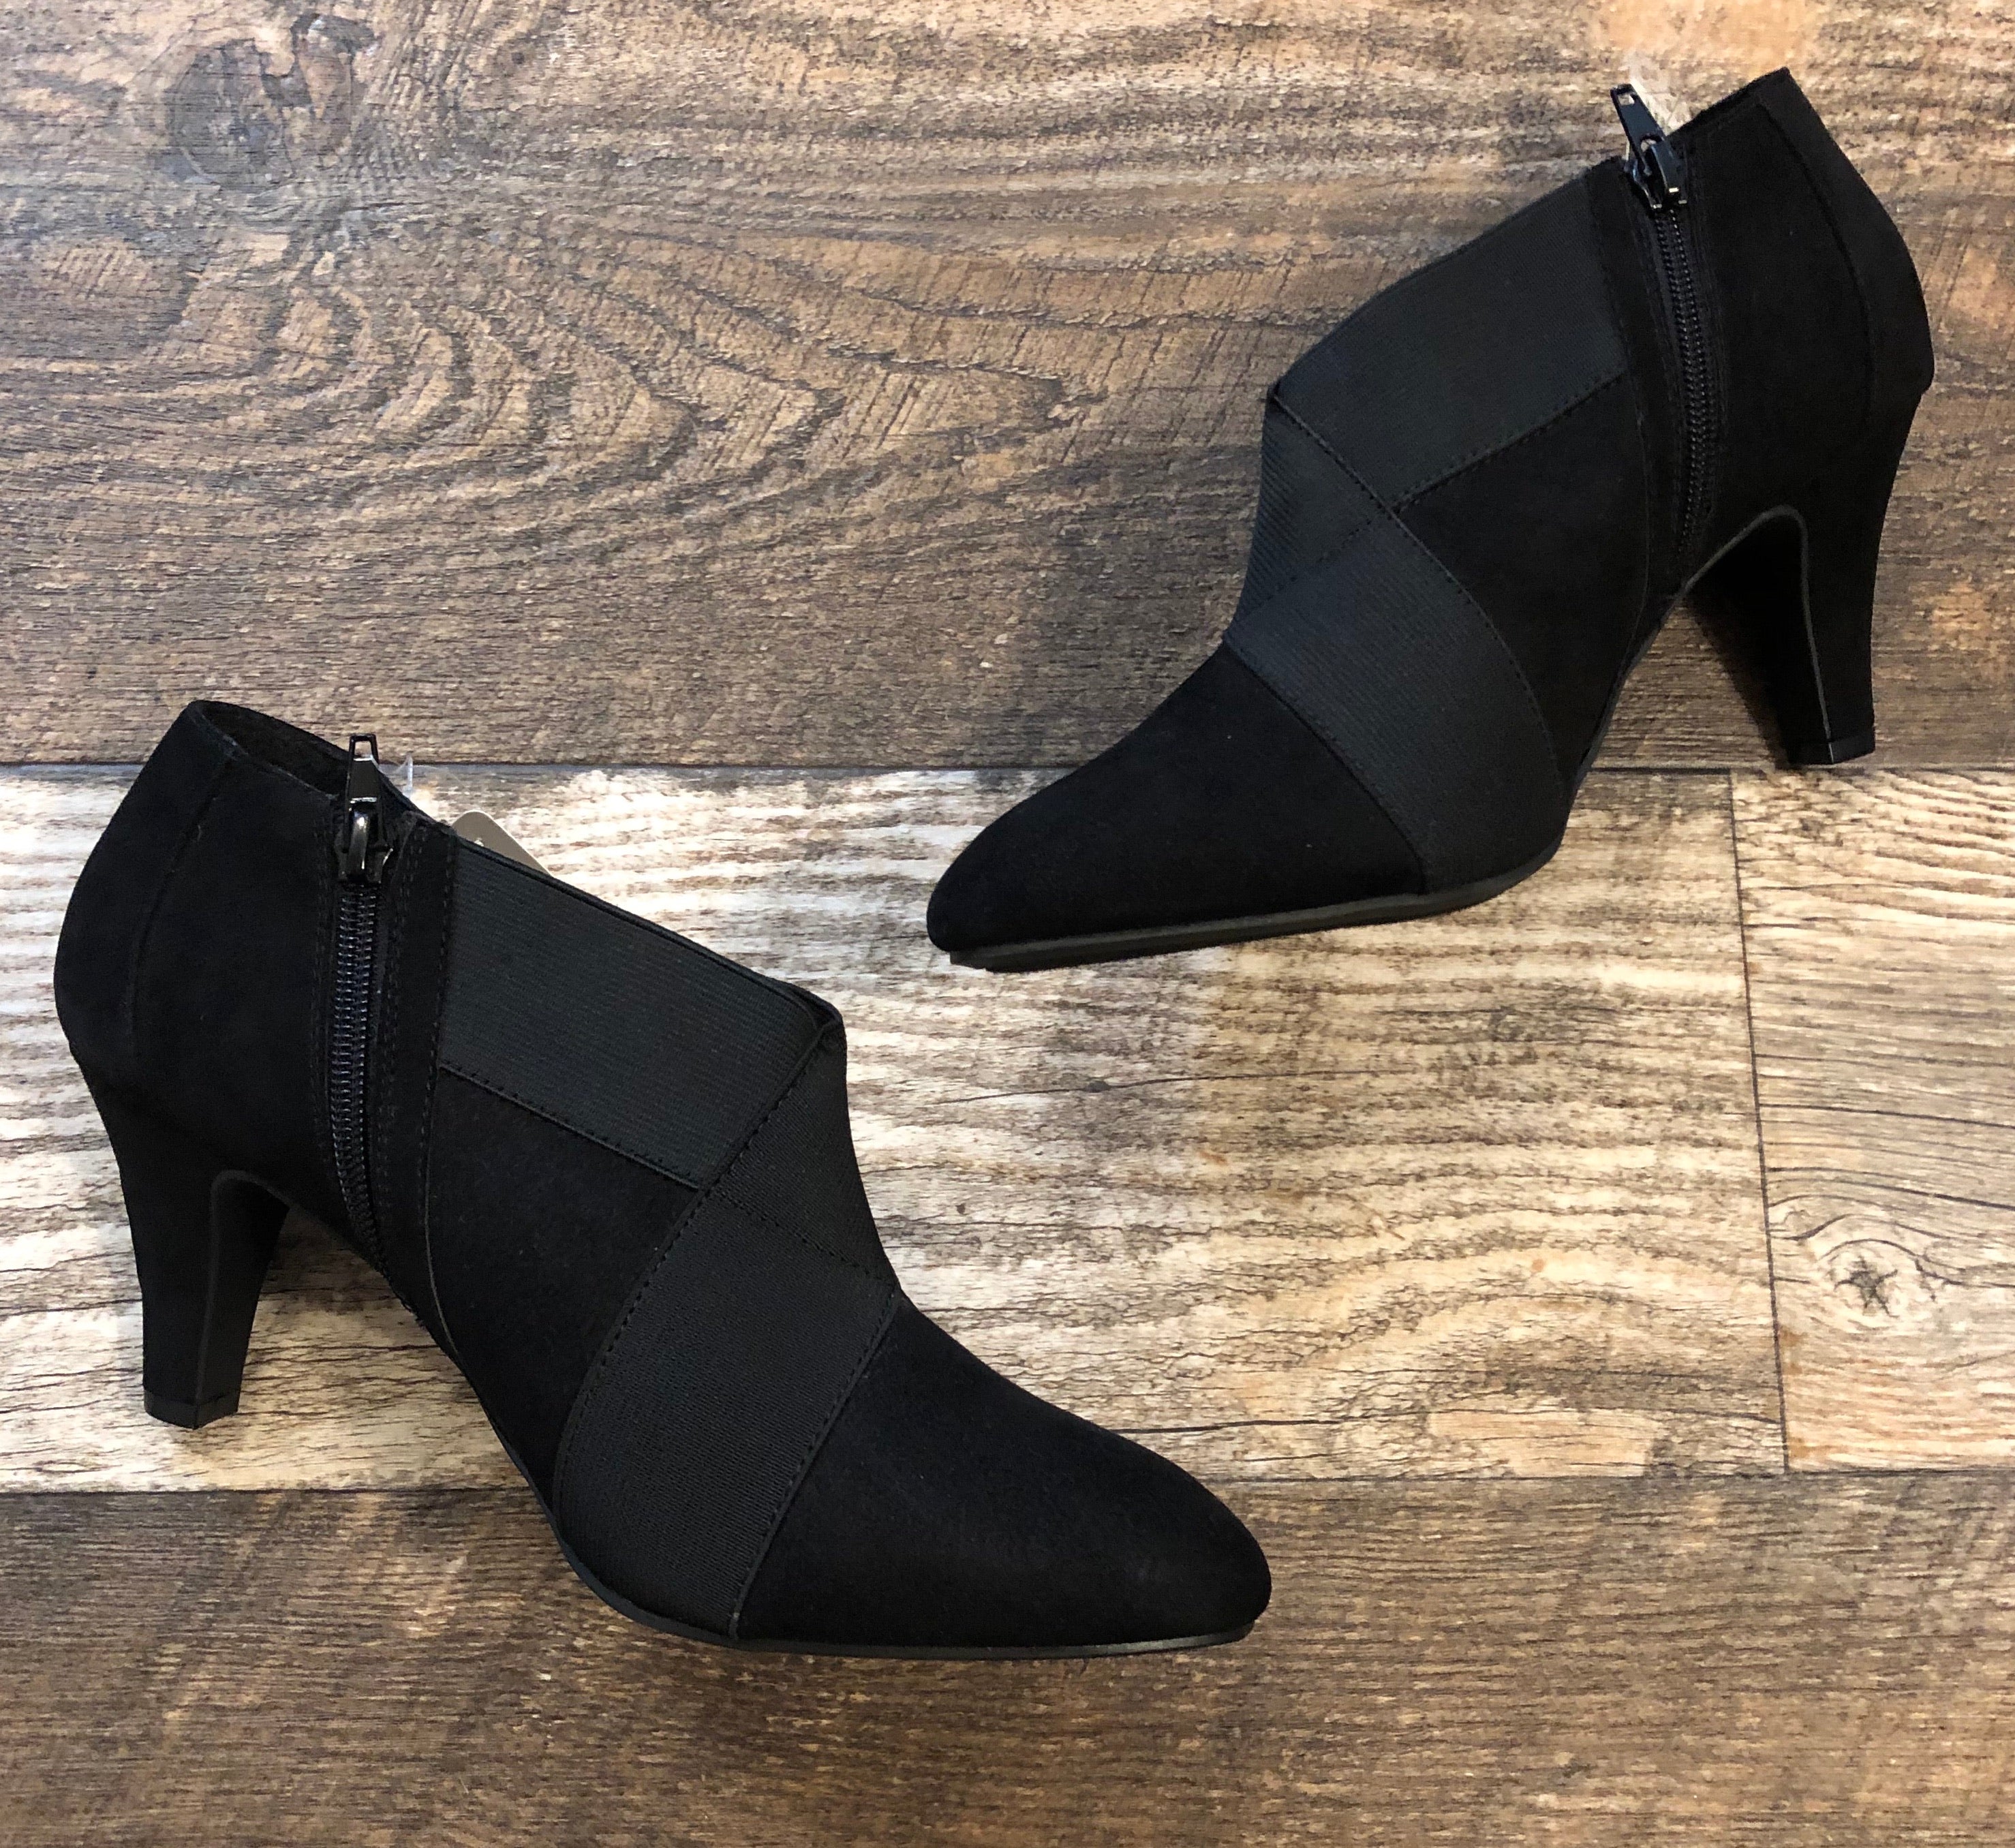 Shoes - Black Booties (9.5)